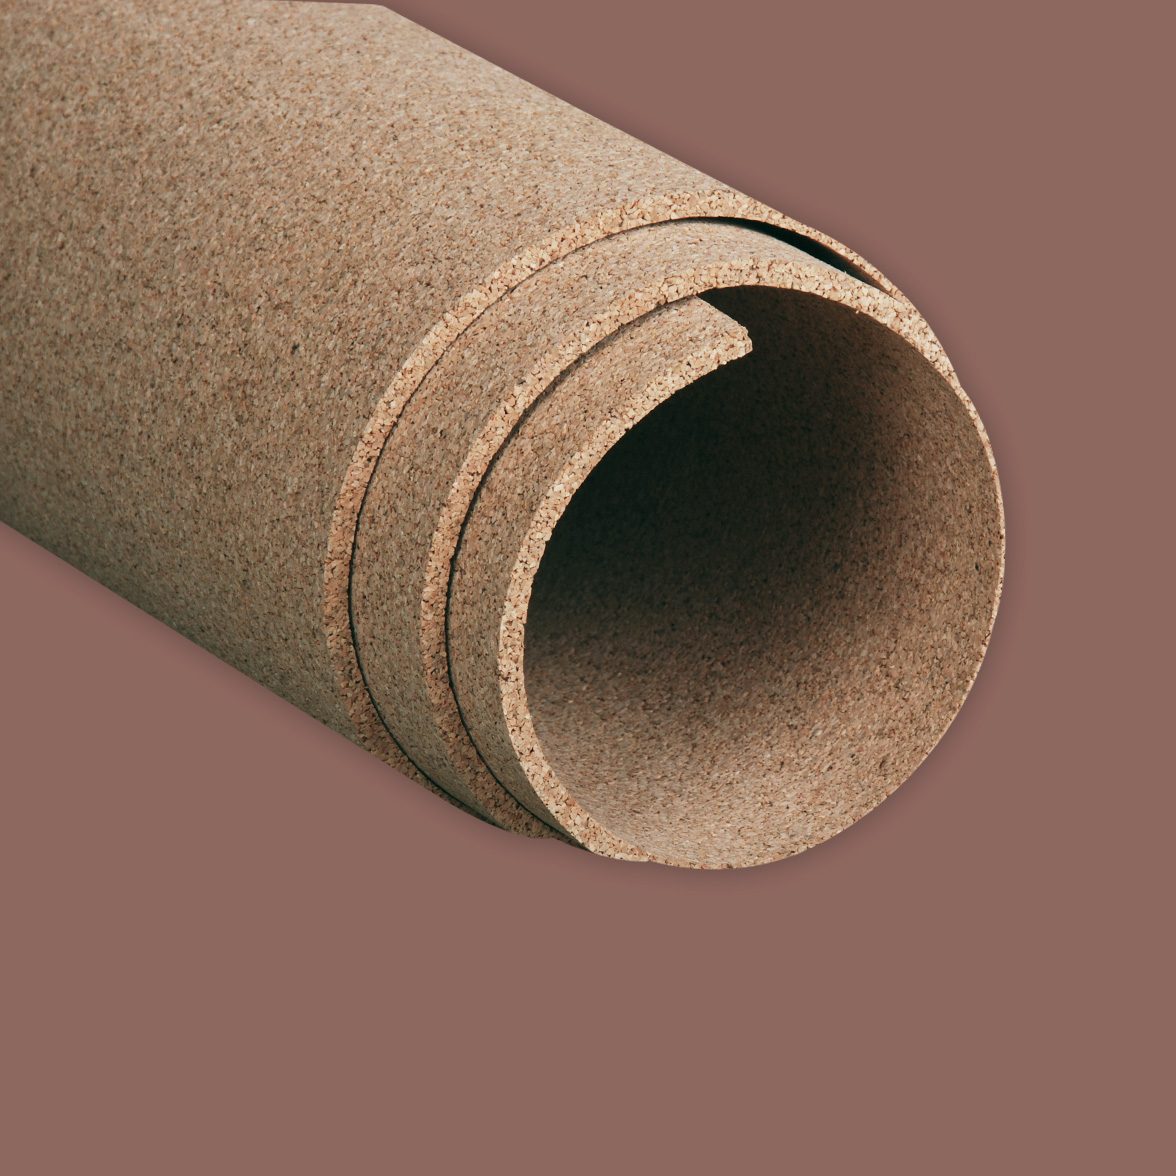 36' x 24' Roll Of Cork 1/16th Inch Thick